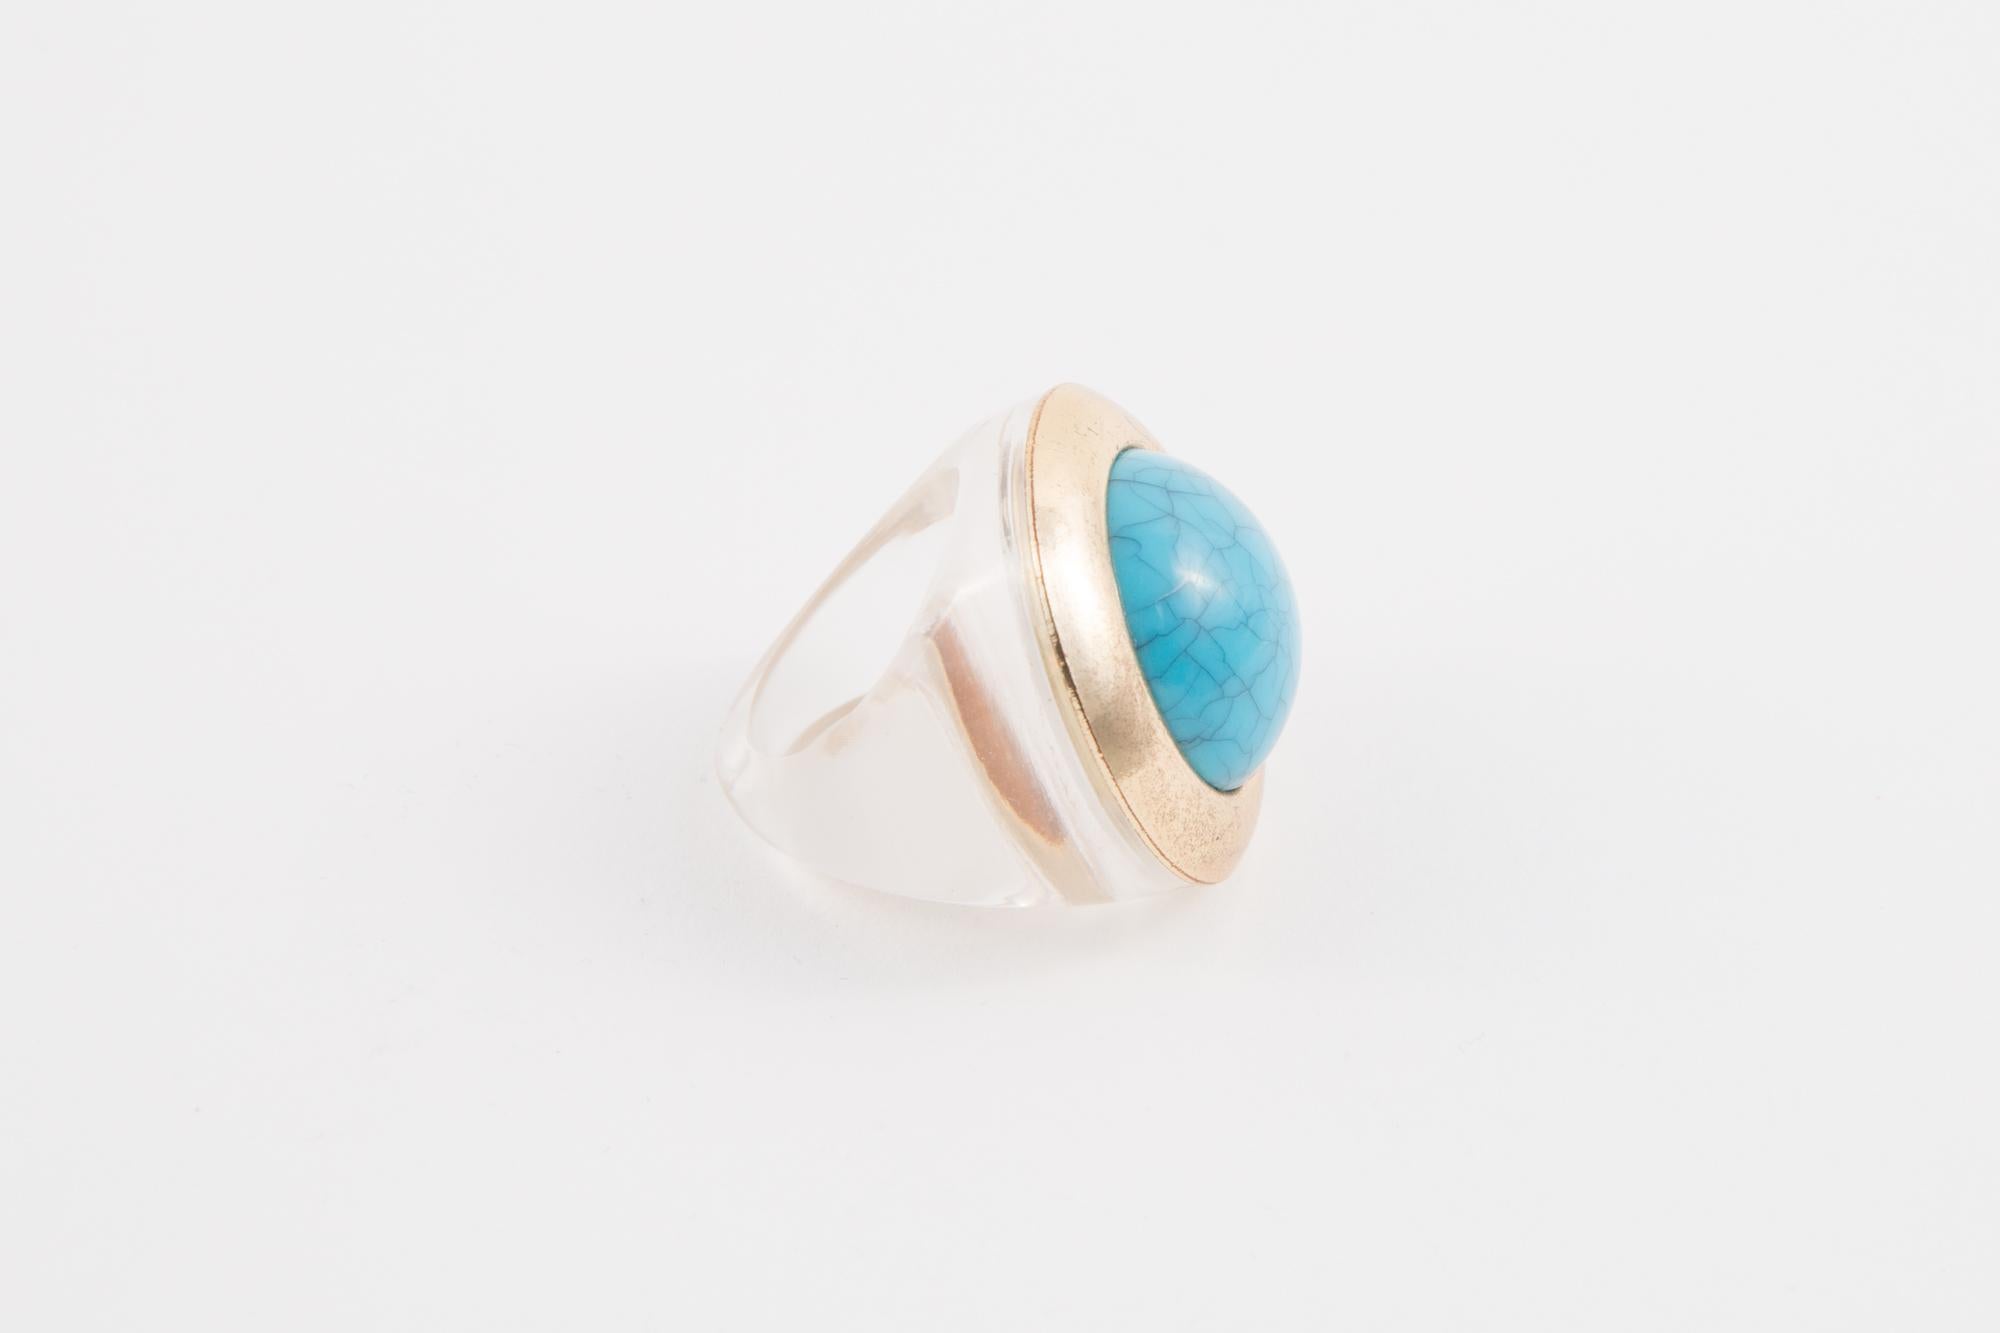 1970s Transparent resin ring featuring a turquoise cabochon and gold ring around. 
Finger diameter:0.8in. (2cm) 
Turquoise 1in (2.5cm) X 1in (2.5cm)
In good vintage condition  
We guarantee you will receive this gorgeous item as described and showed